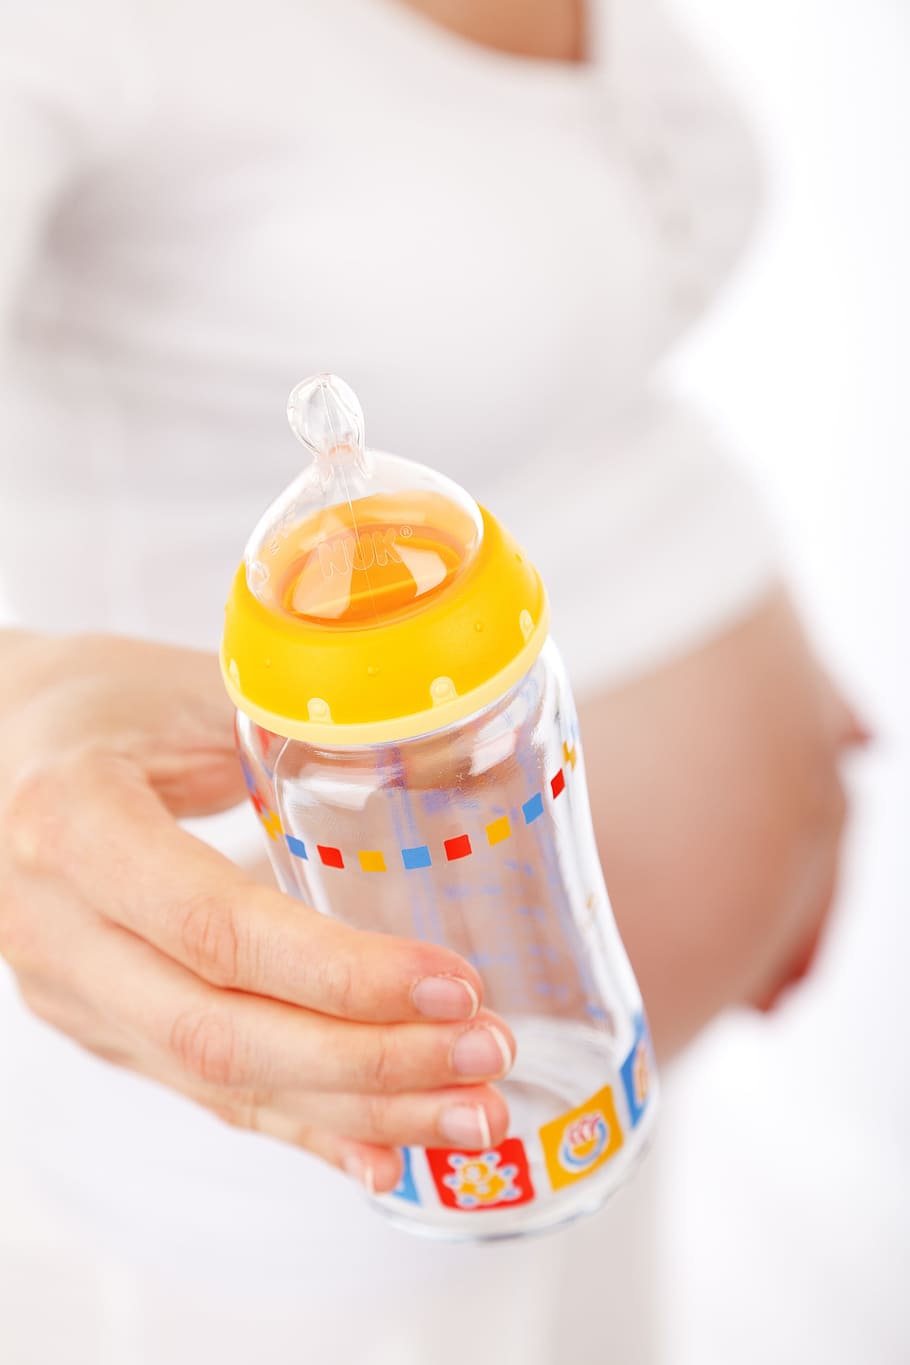 shallow, focus, yellow, feeding, bottle, belly, care, girl, hand, holding